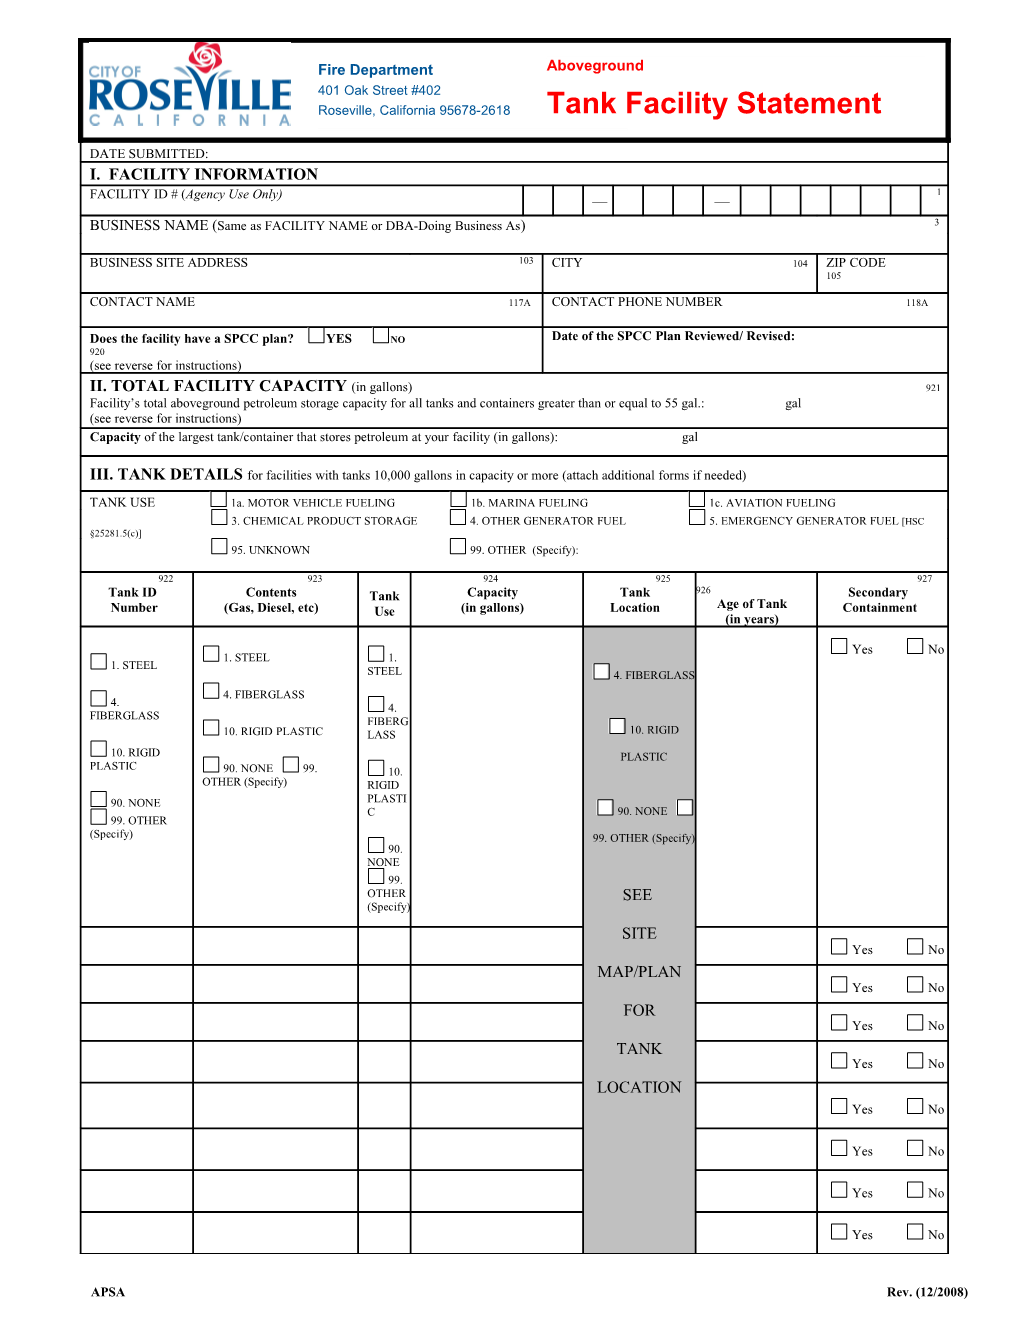 Unfied Program Consolidated Form